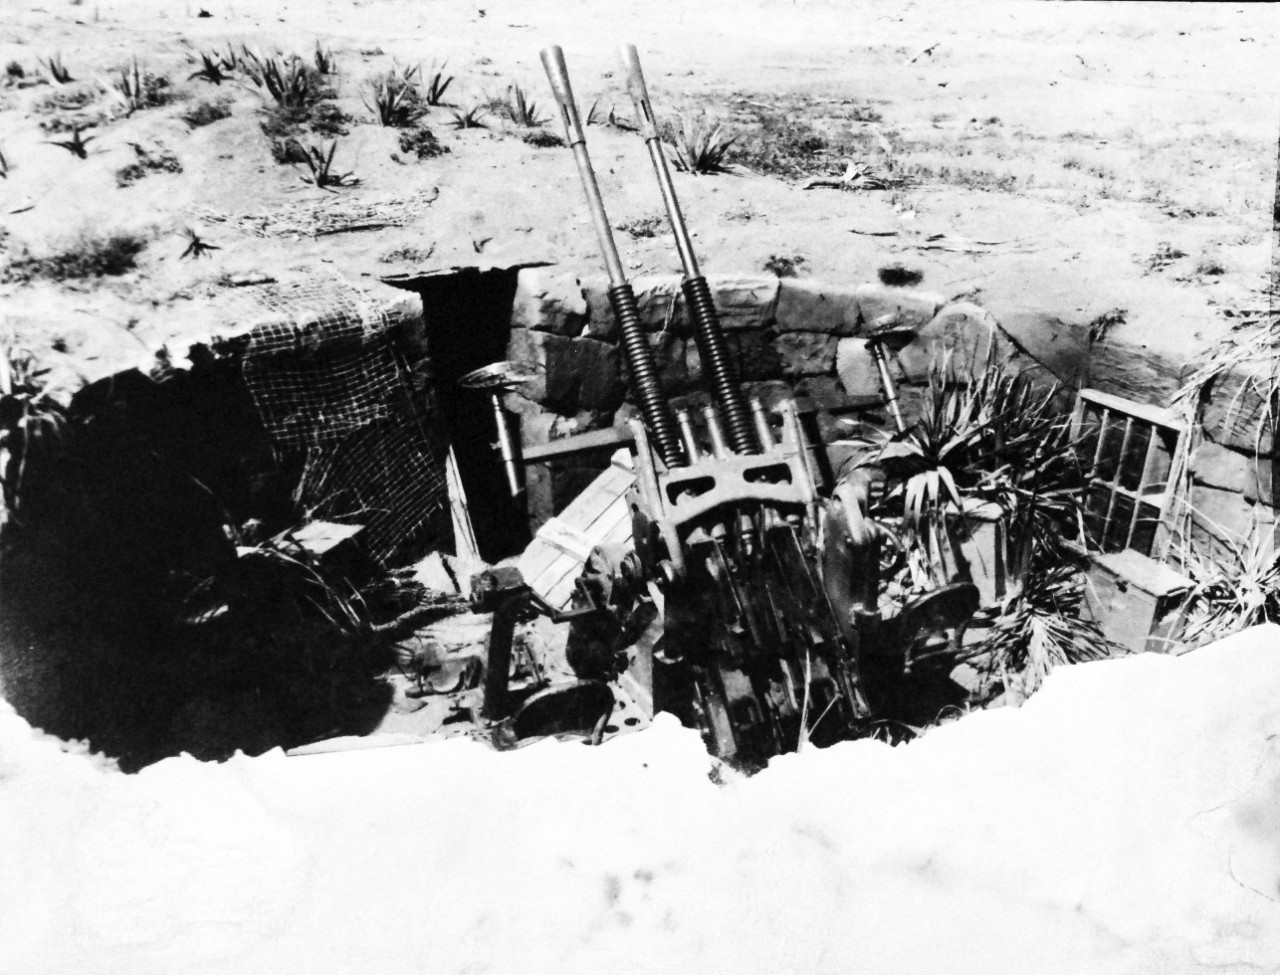 127-GW-304-143496:  Battle for Iwo Jima, February-March 1945.   Twin-mount 25mm anti-aircraft guns in emplacement.  Photographed by Kauffman, March 1945. Official U.S. Marine Corps photograph, now in the collections of the National Archives.  (2016/02/17).